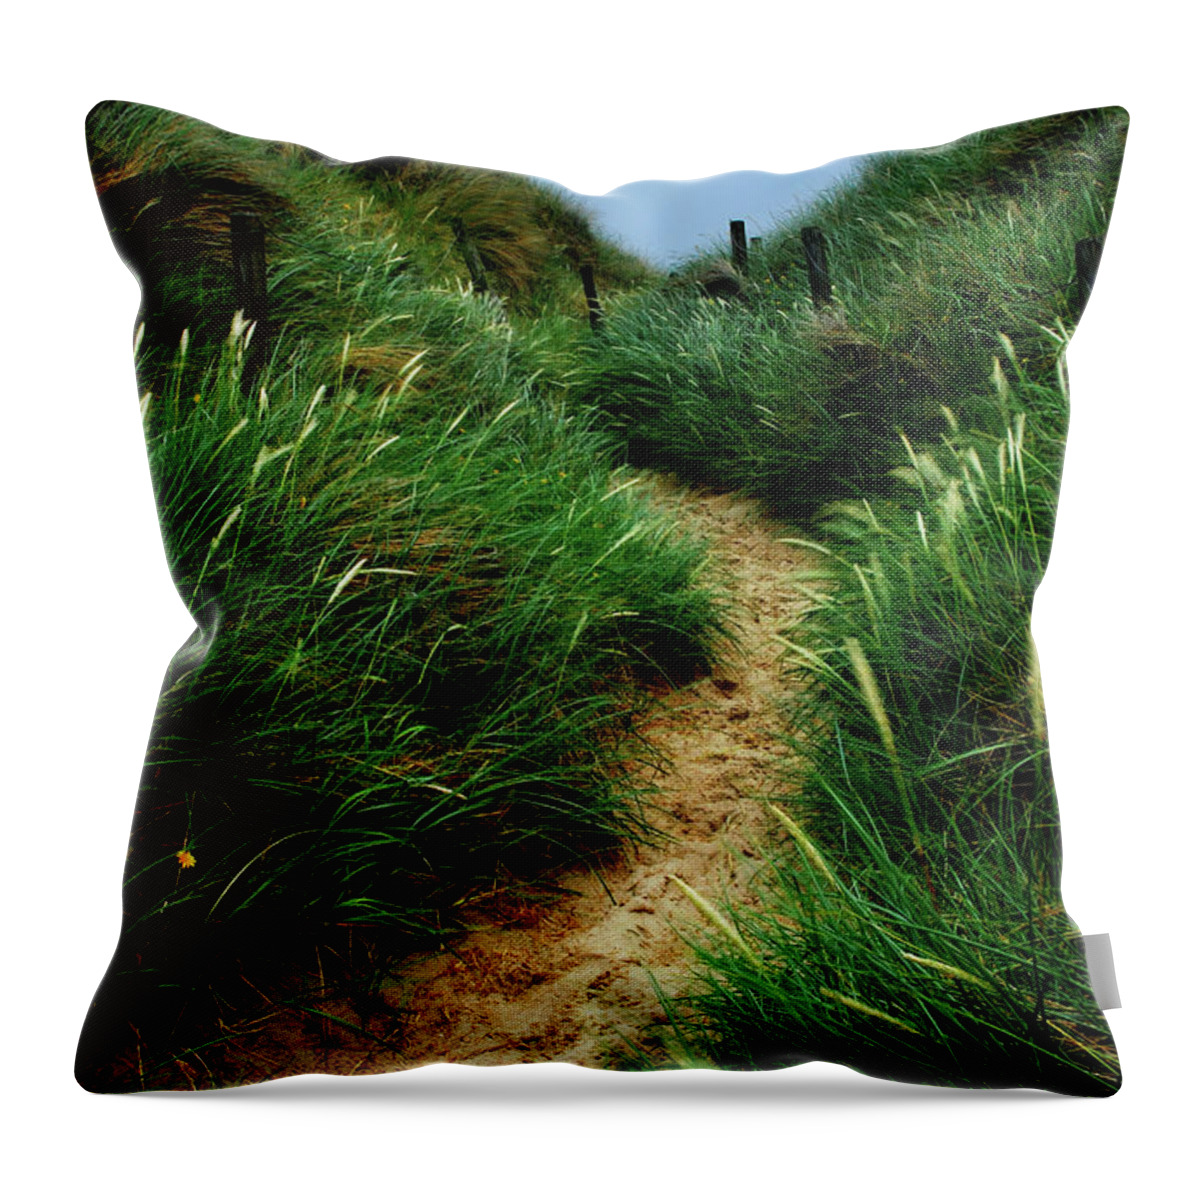 Beach Throw Pillow featuring the photograph Way Through The Dunes by Hannes Cmarits